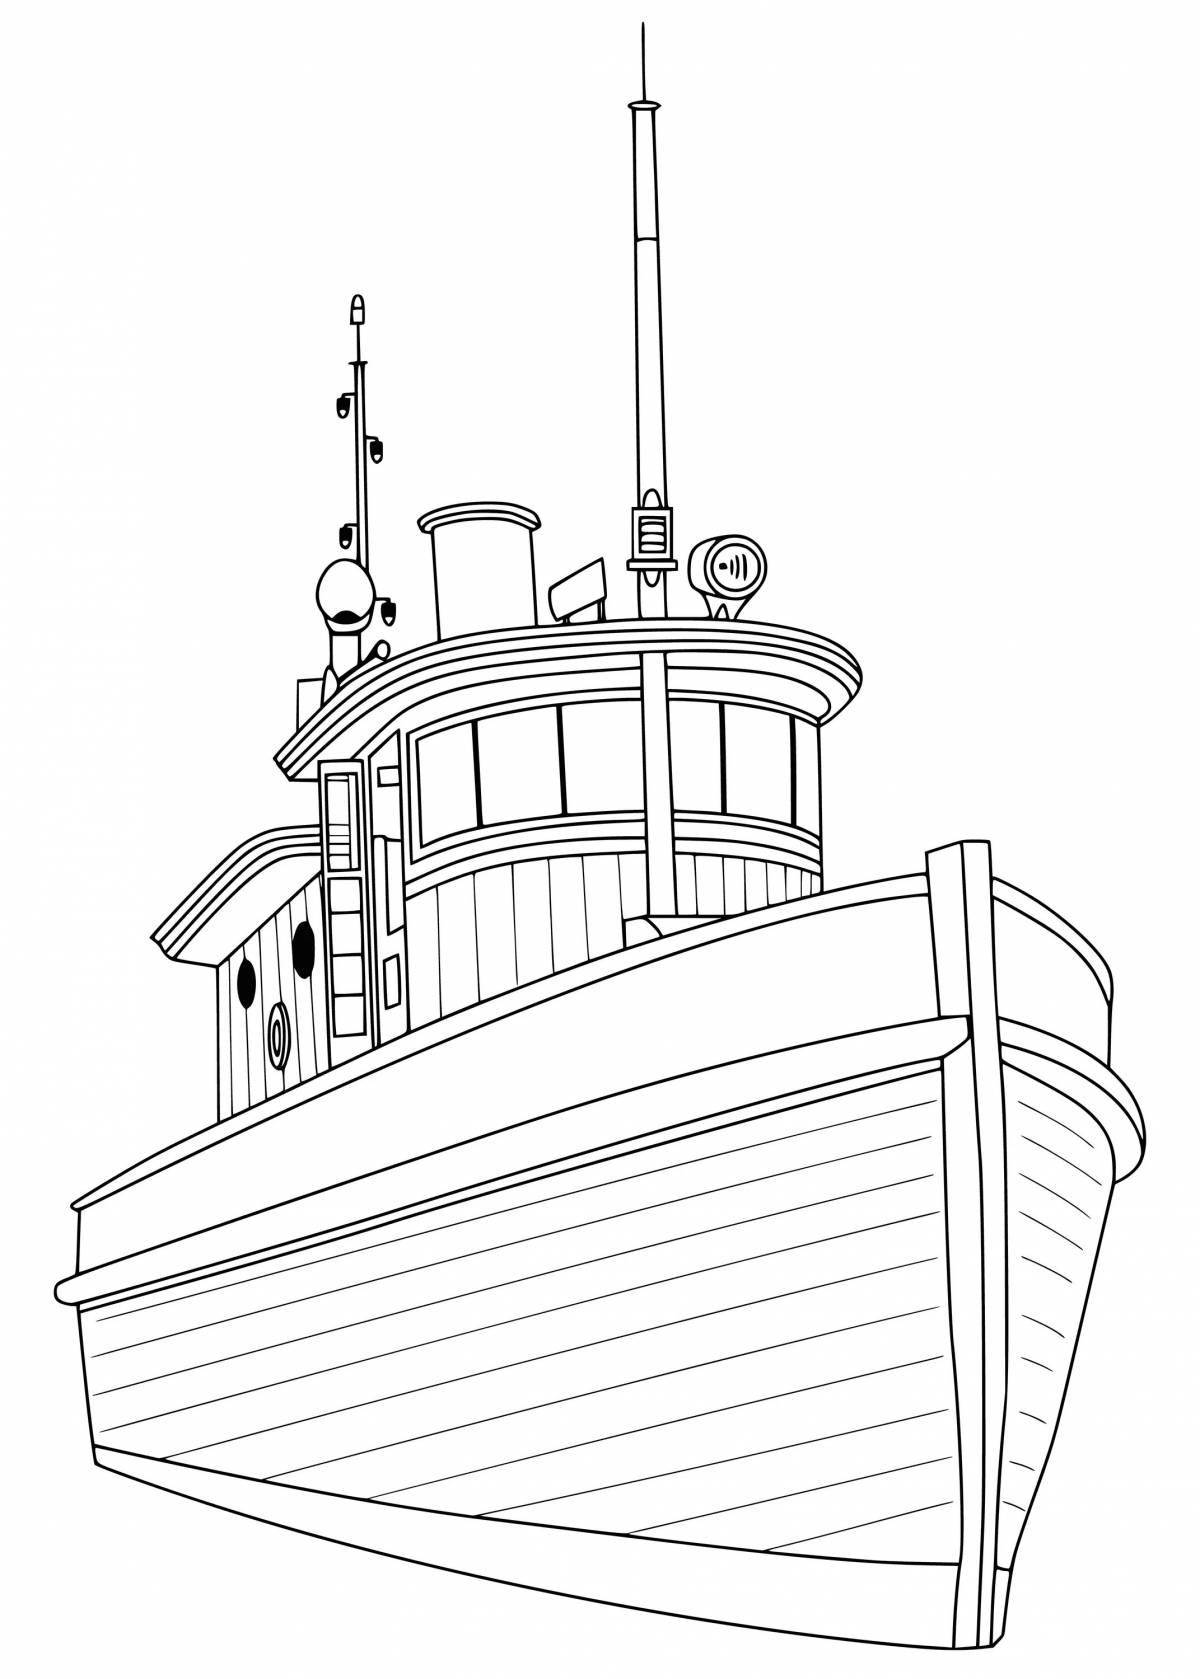 Colorful tugboat coloring page for kids